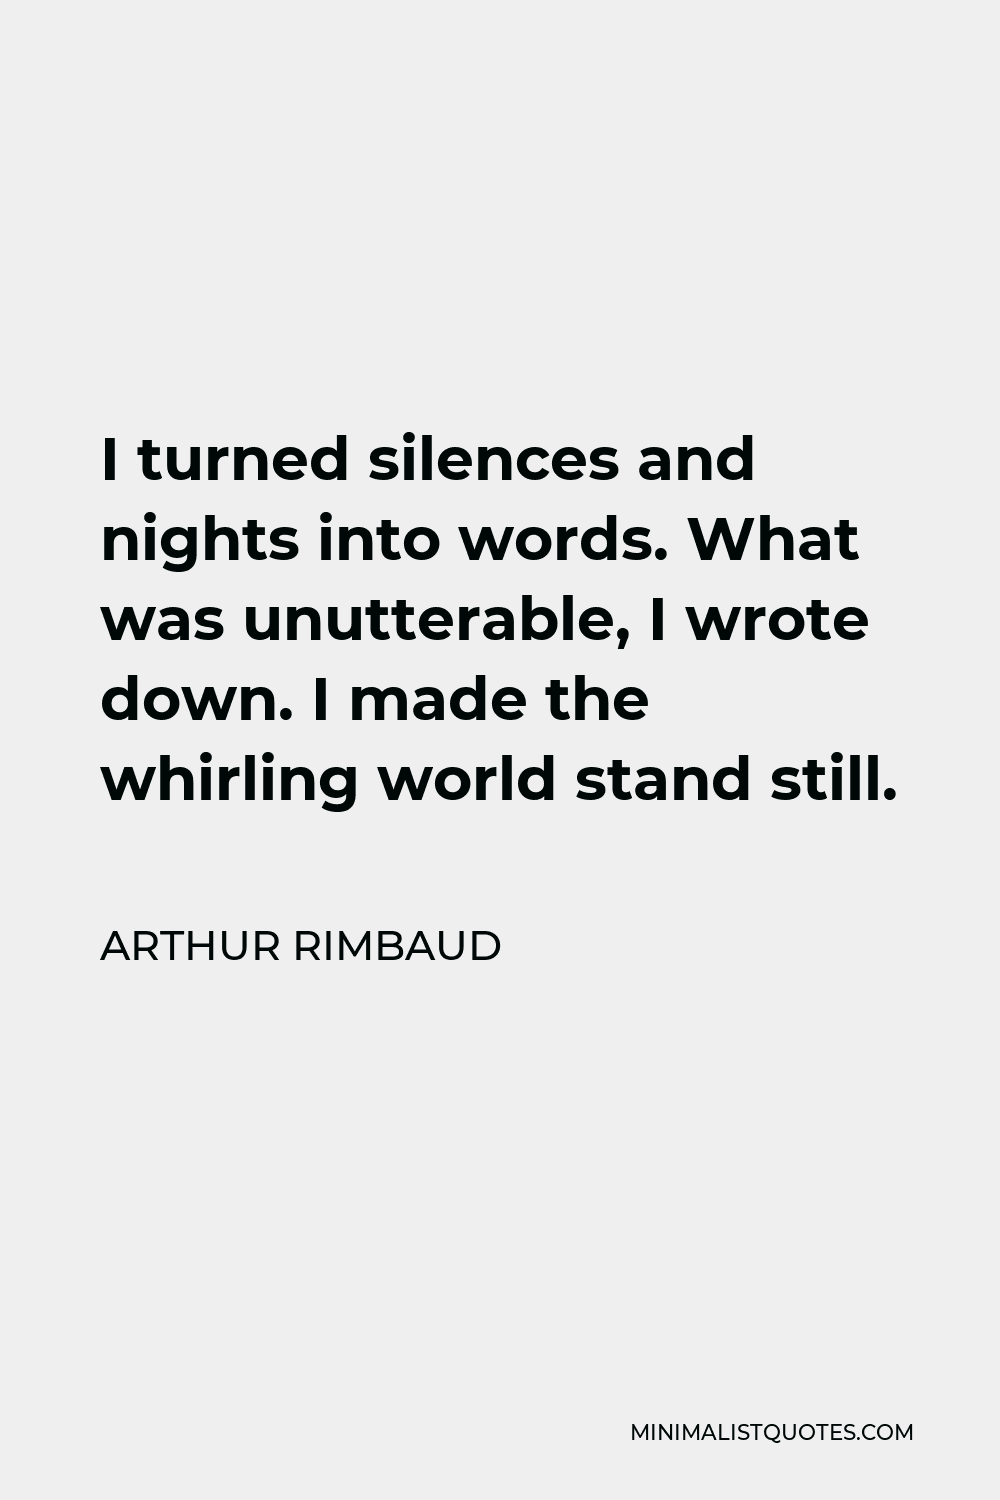 Arthur Rimbaud Quote - I turned silences and nights into words. What was unutterable, I wrote down. I made the whirling world stand still.